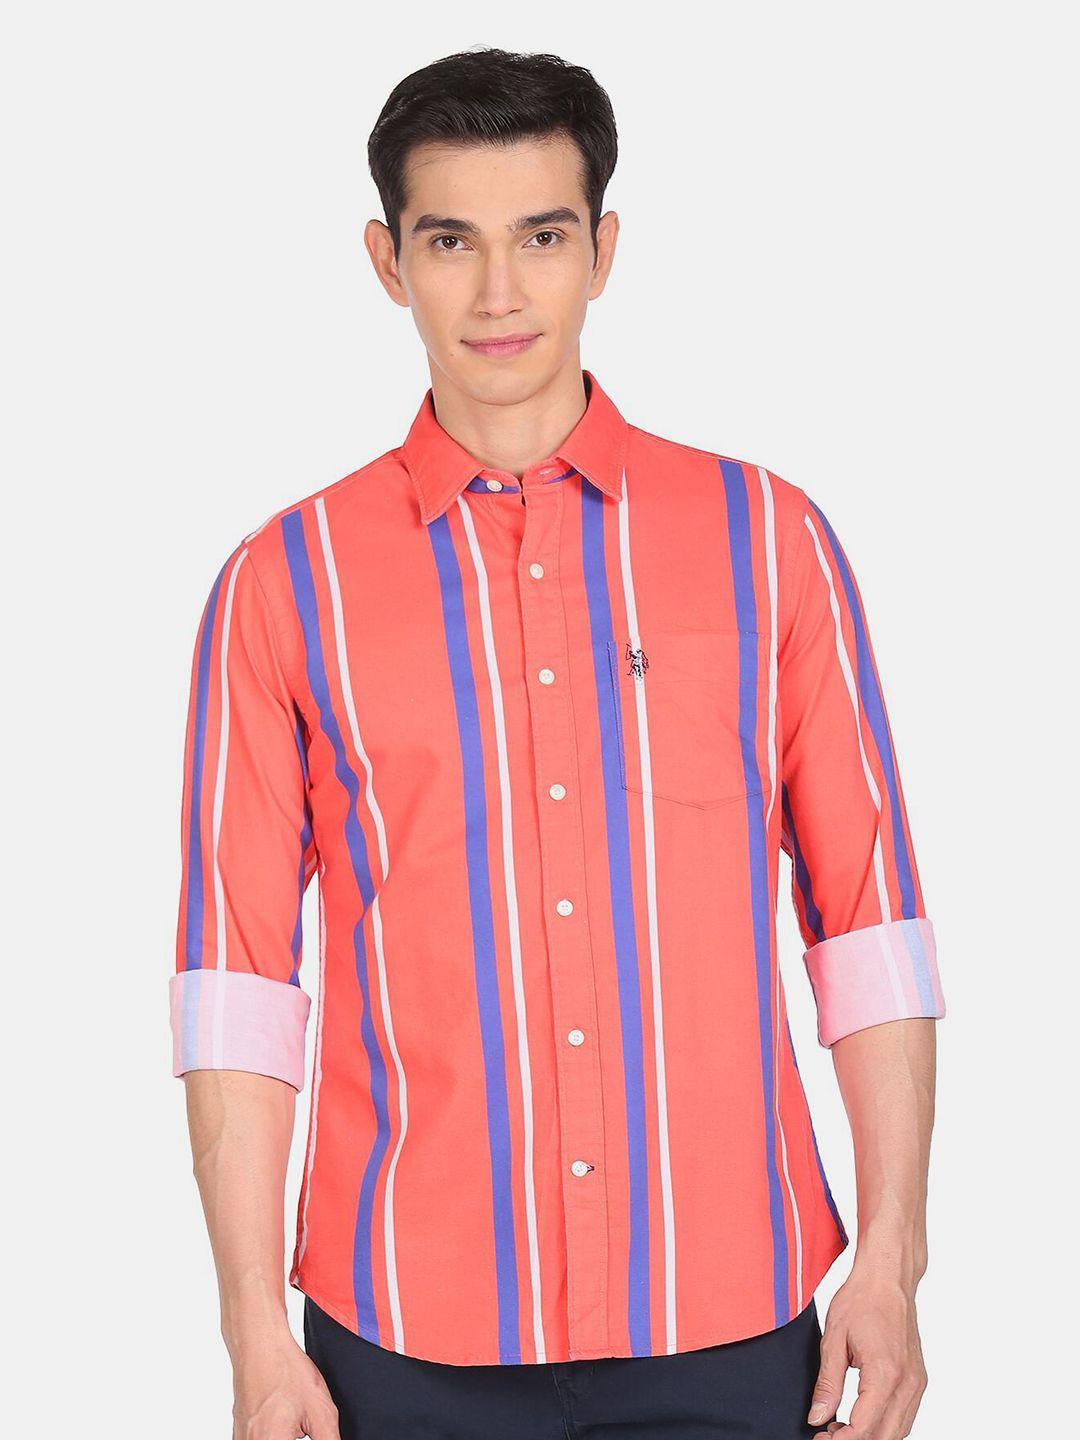 u s polo assn men coral and blue striped 100% cotton casual shirt